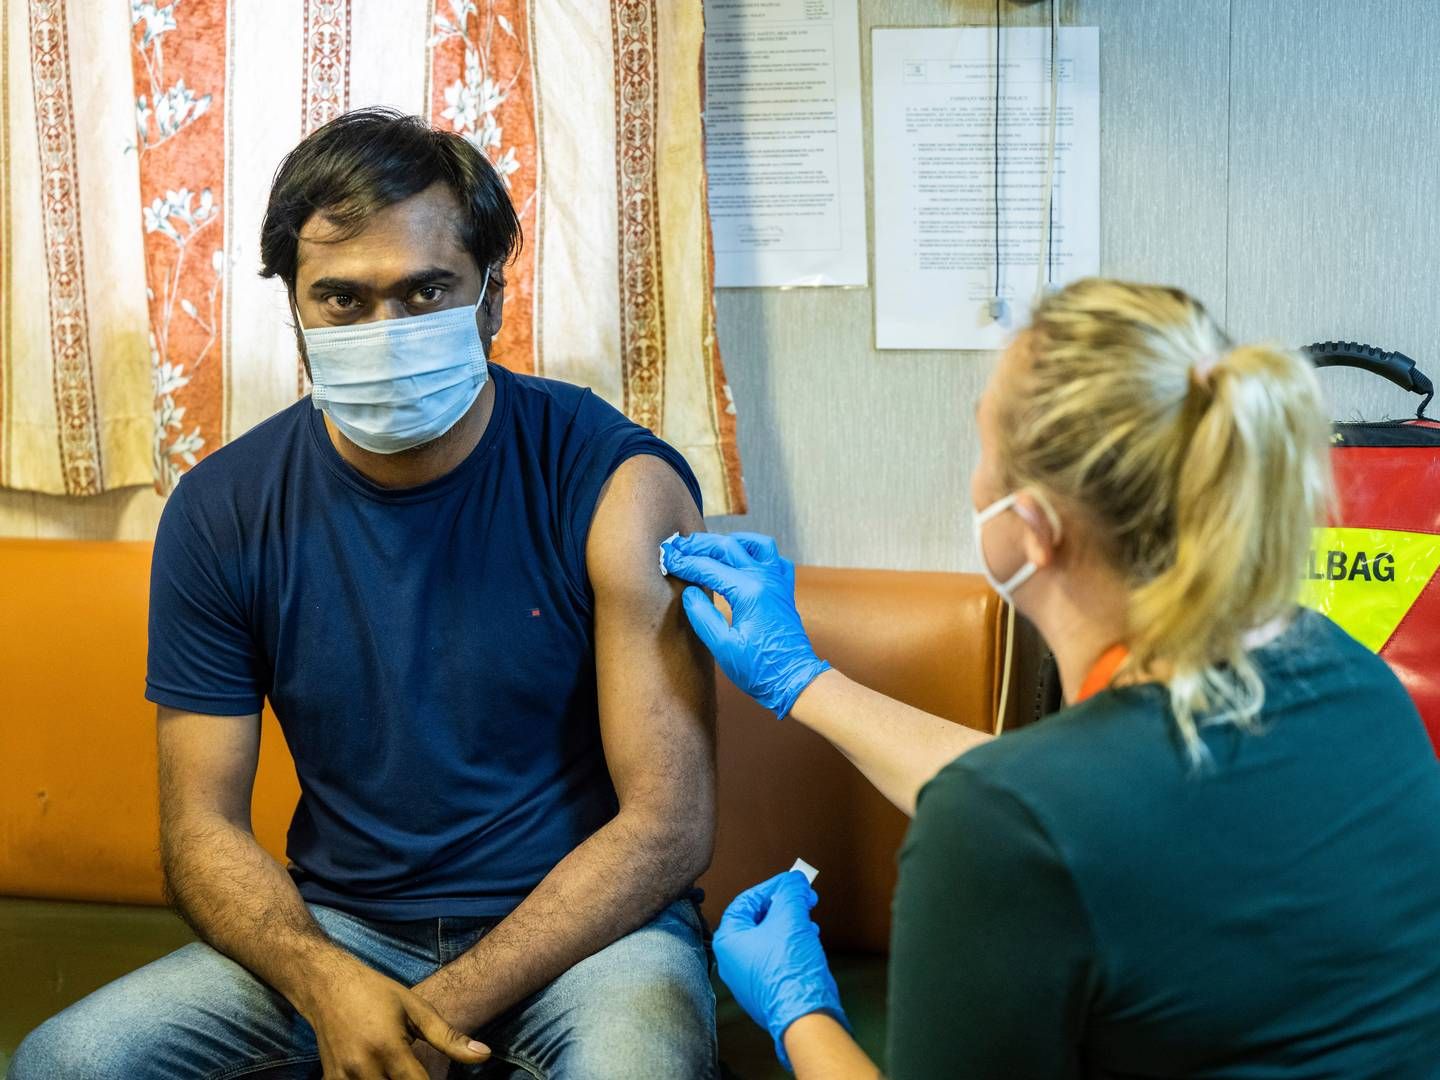 The coronavirus pandemic gave shipping a bad image as a workplace because thousands of seafarers were trapped on their ships for many months. Here, a seafarer is vaccinated in Bremen, Germany. | Photo: Mohssen Assanimoghaddam/AP/Ritzau Scanpix